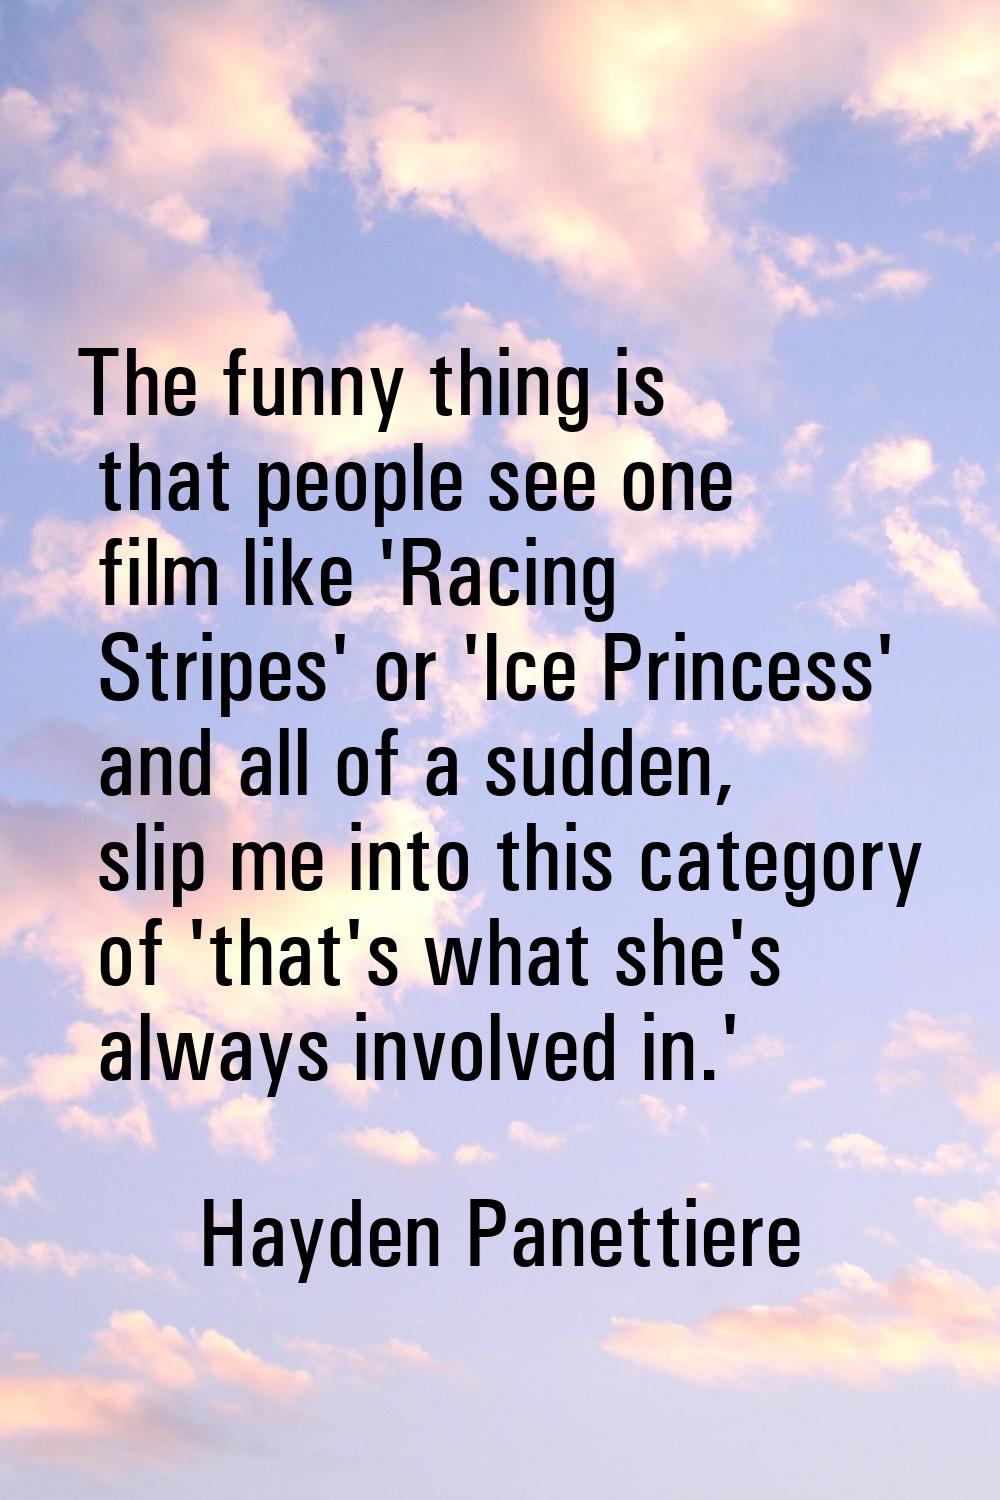 The funny thing is that people see one film like 'Racing Stripes' or 'Ice Princess' and all of a su